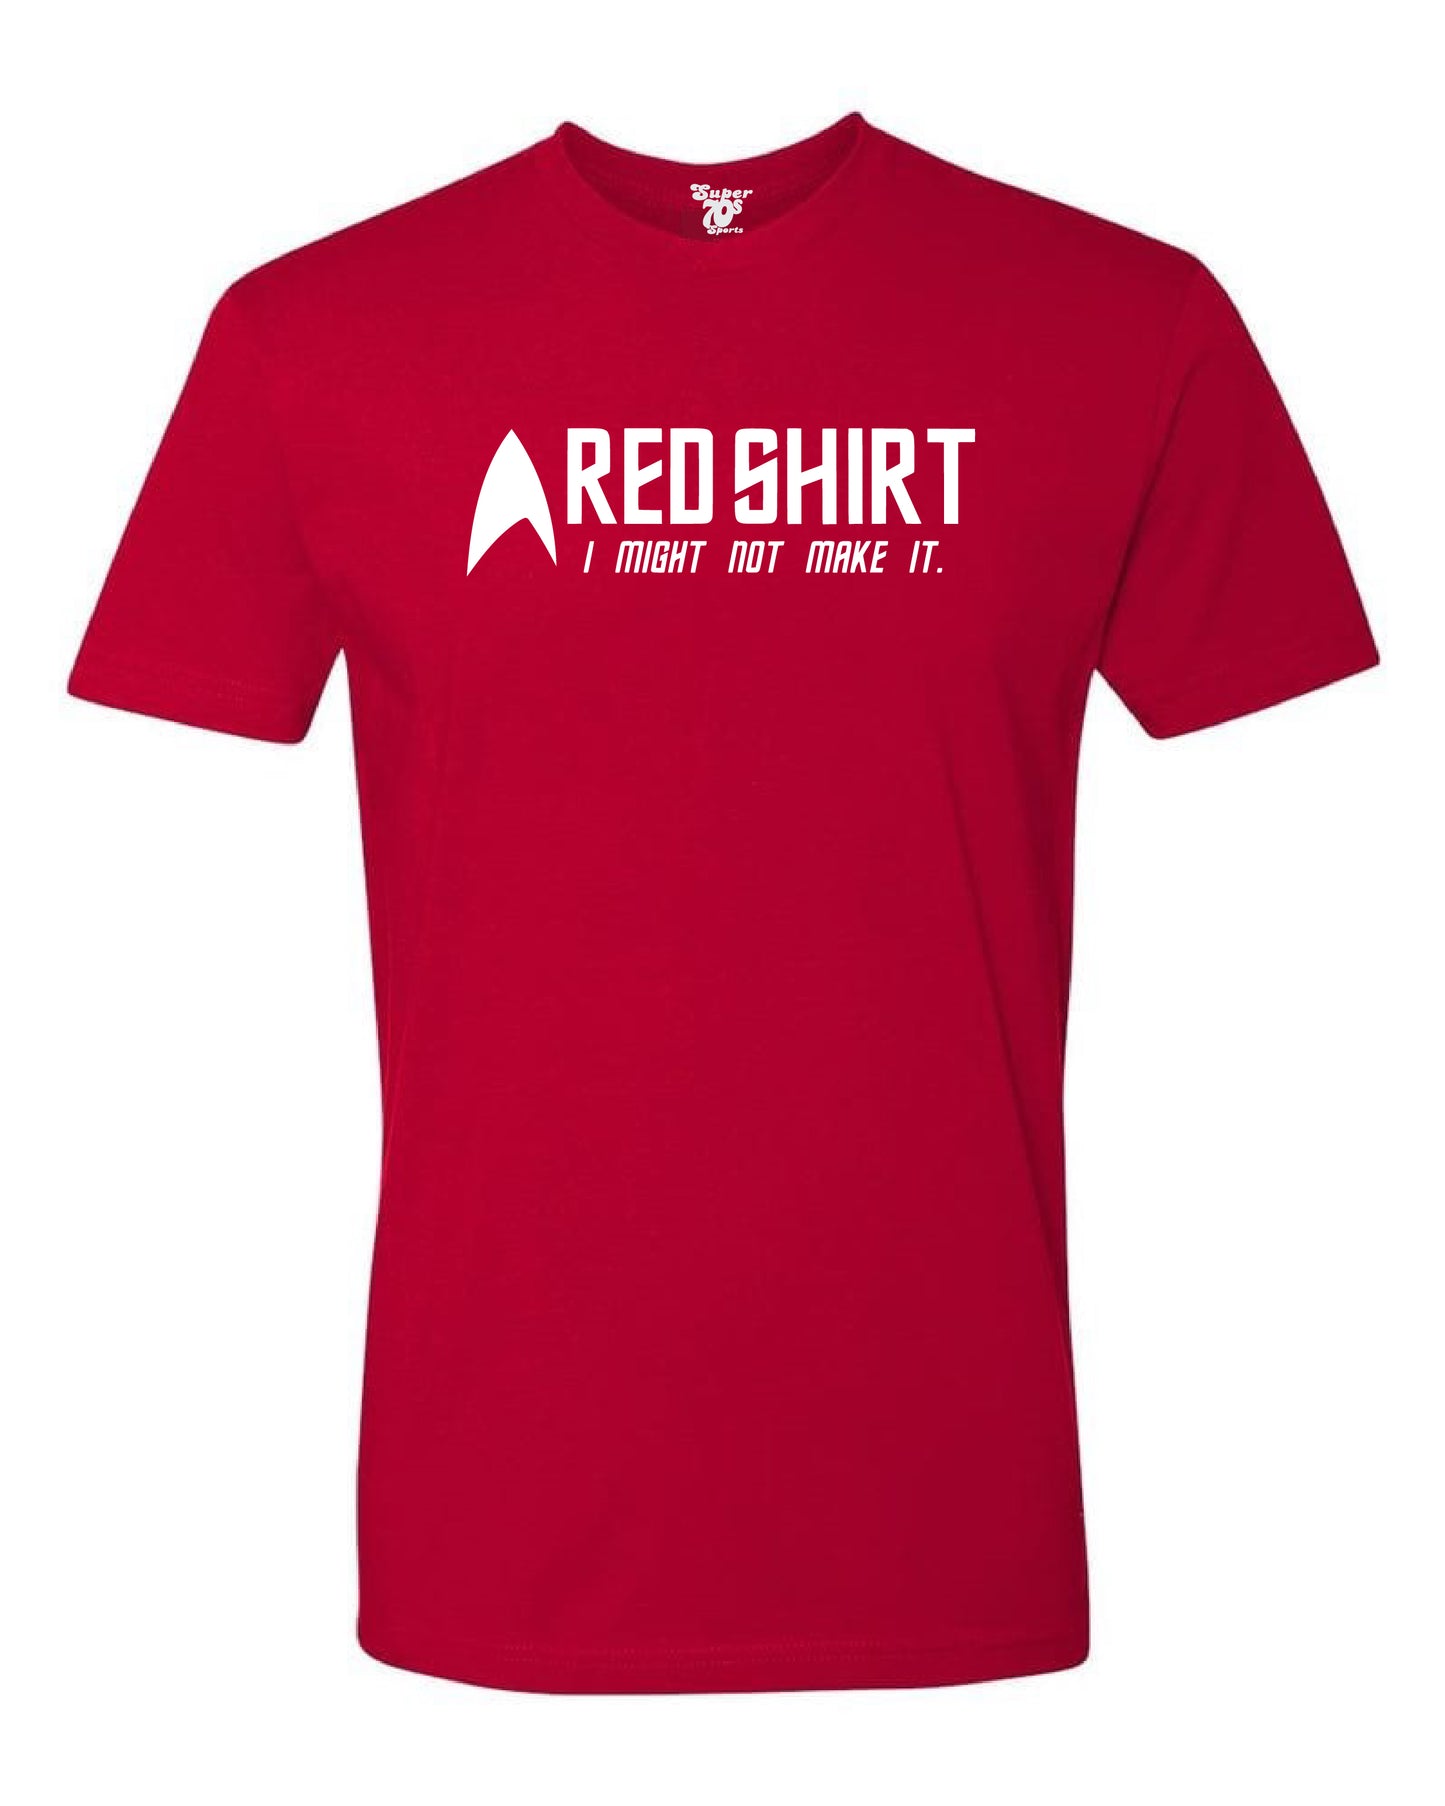 The Red Shirt Tee